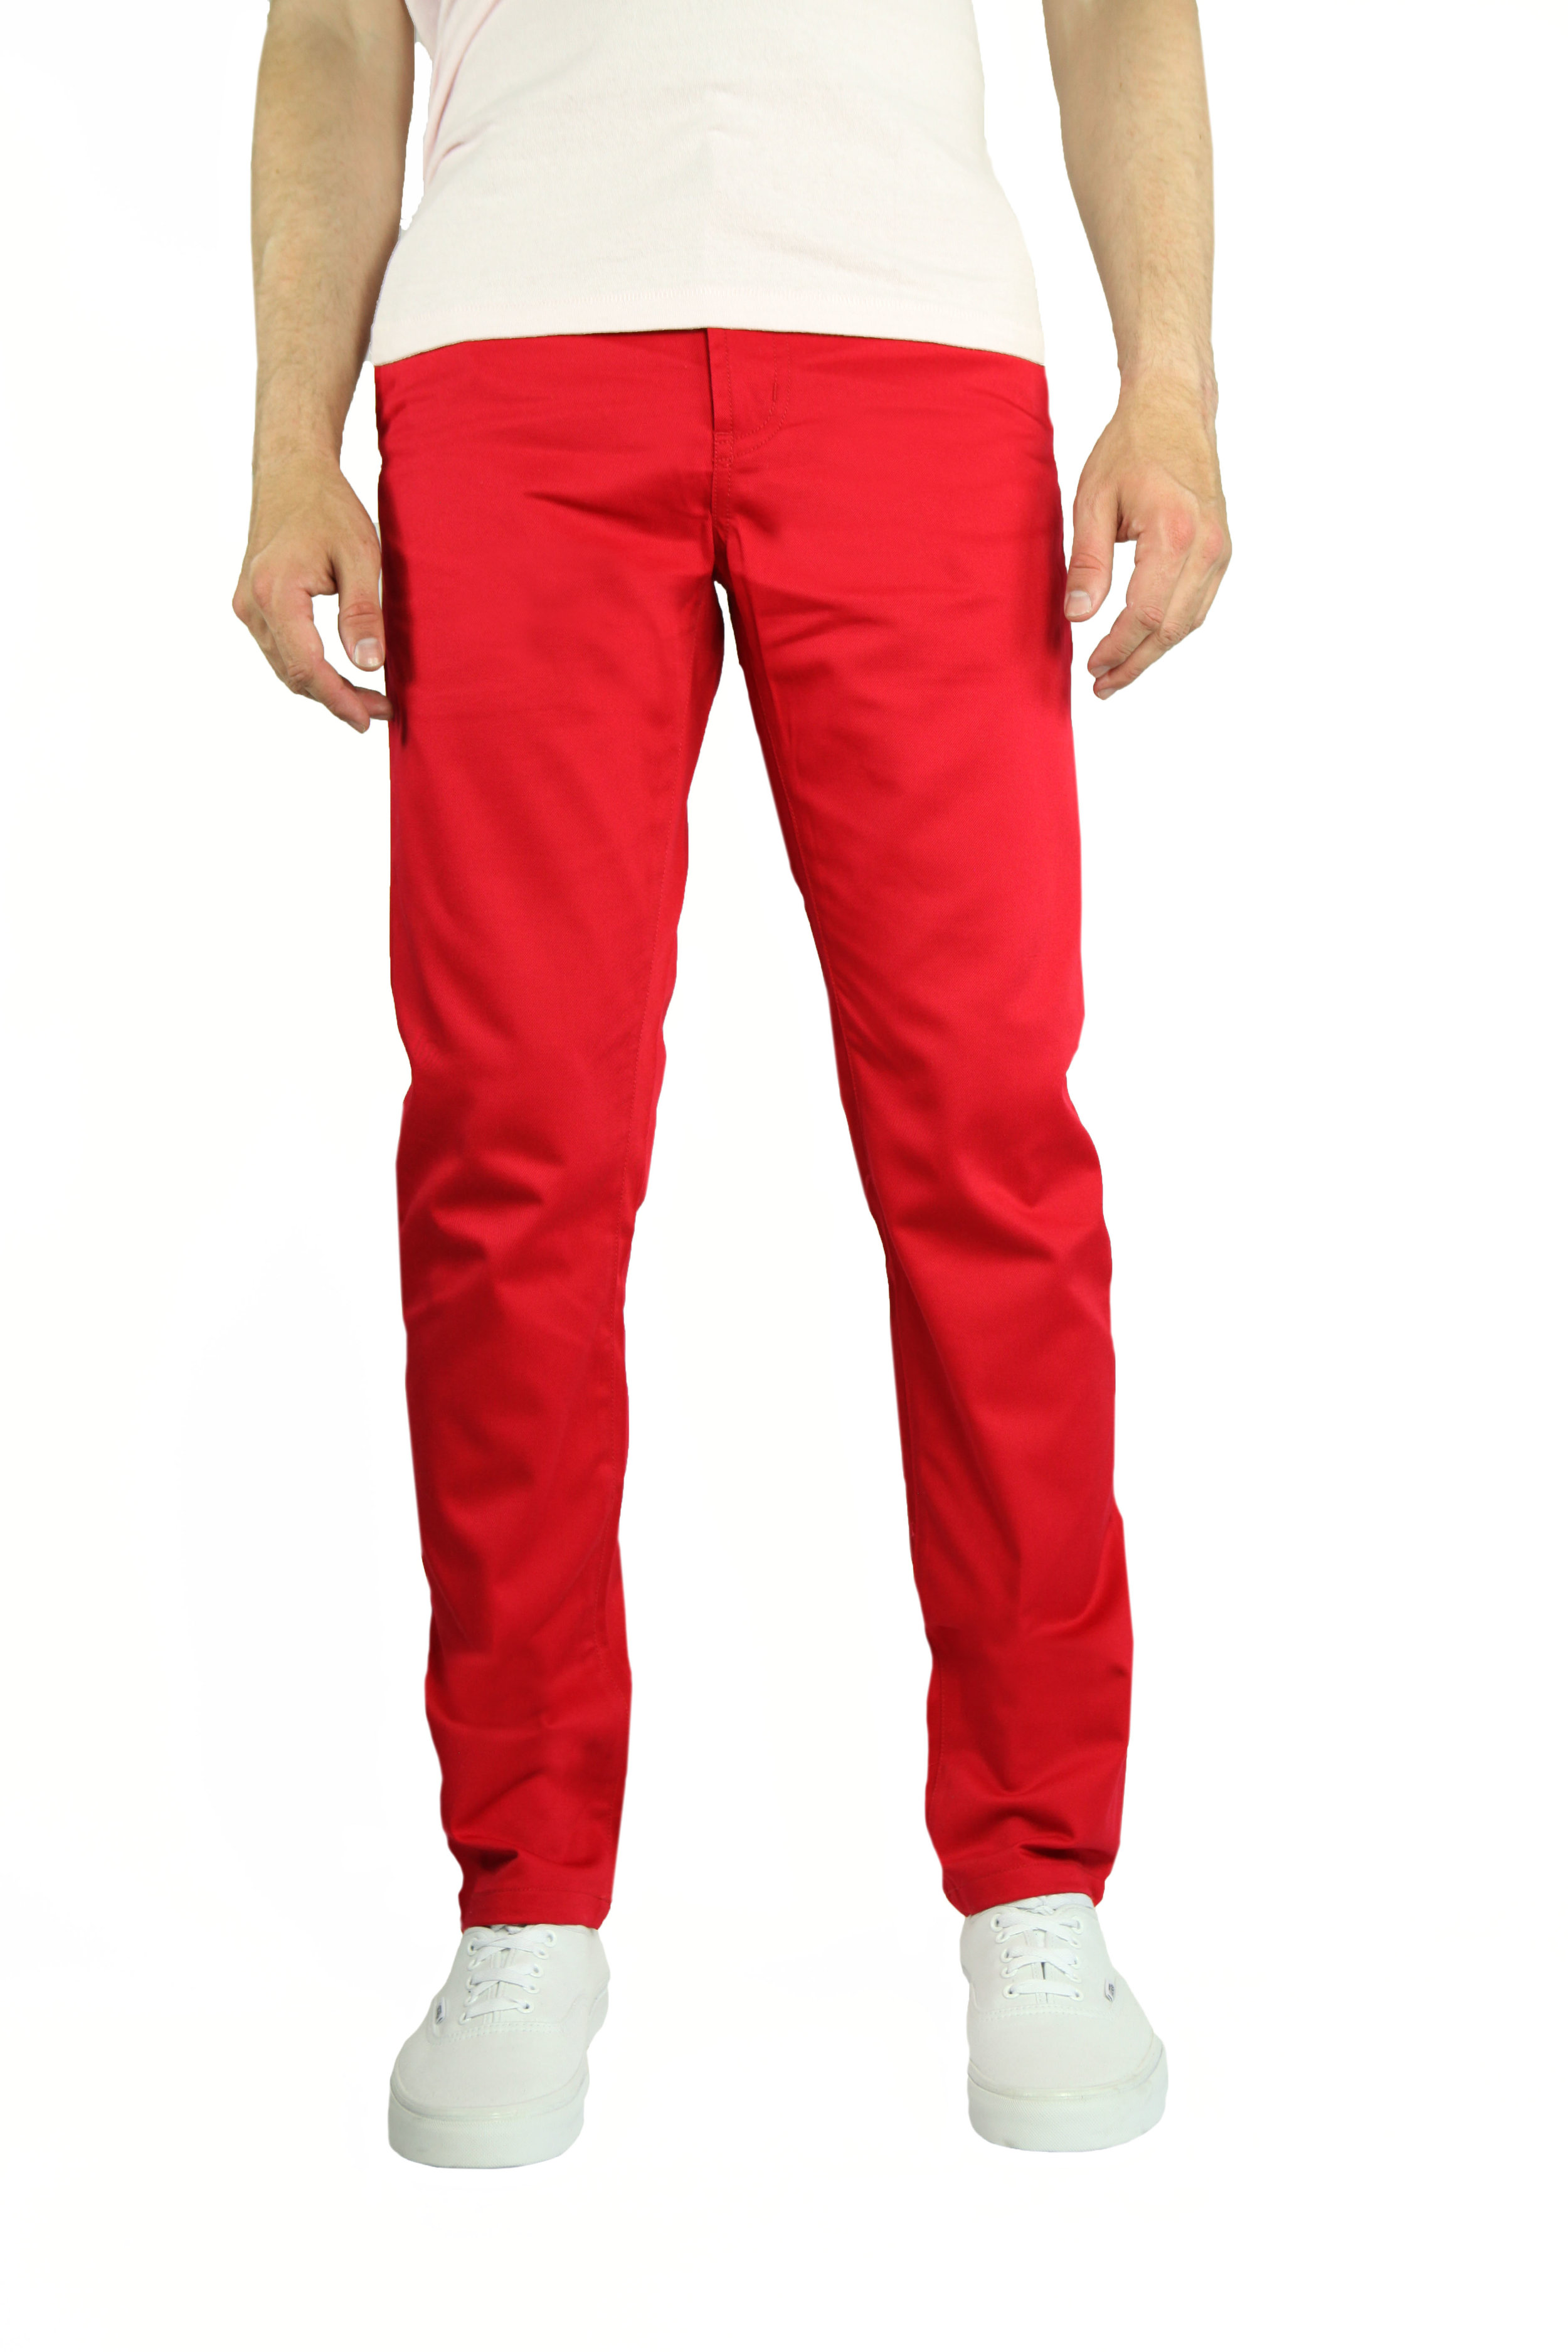 red pants jeans